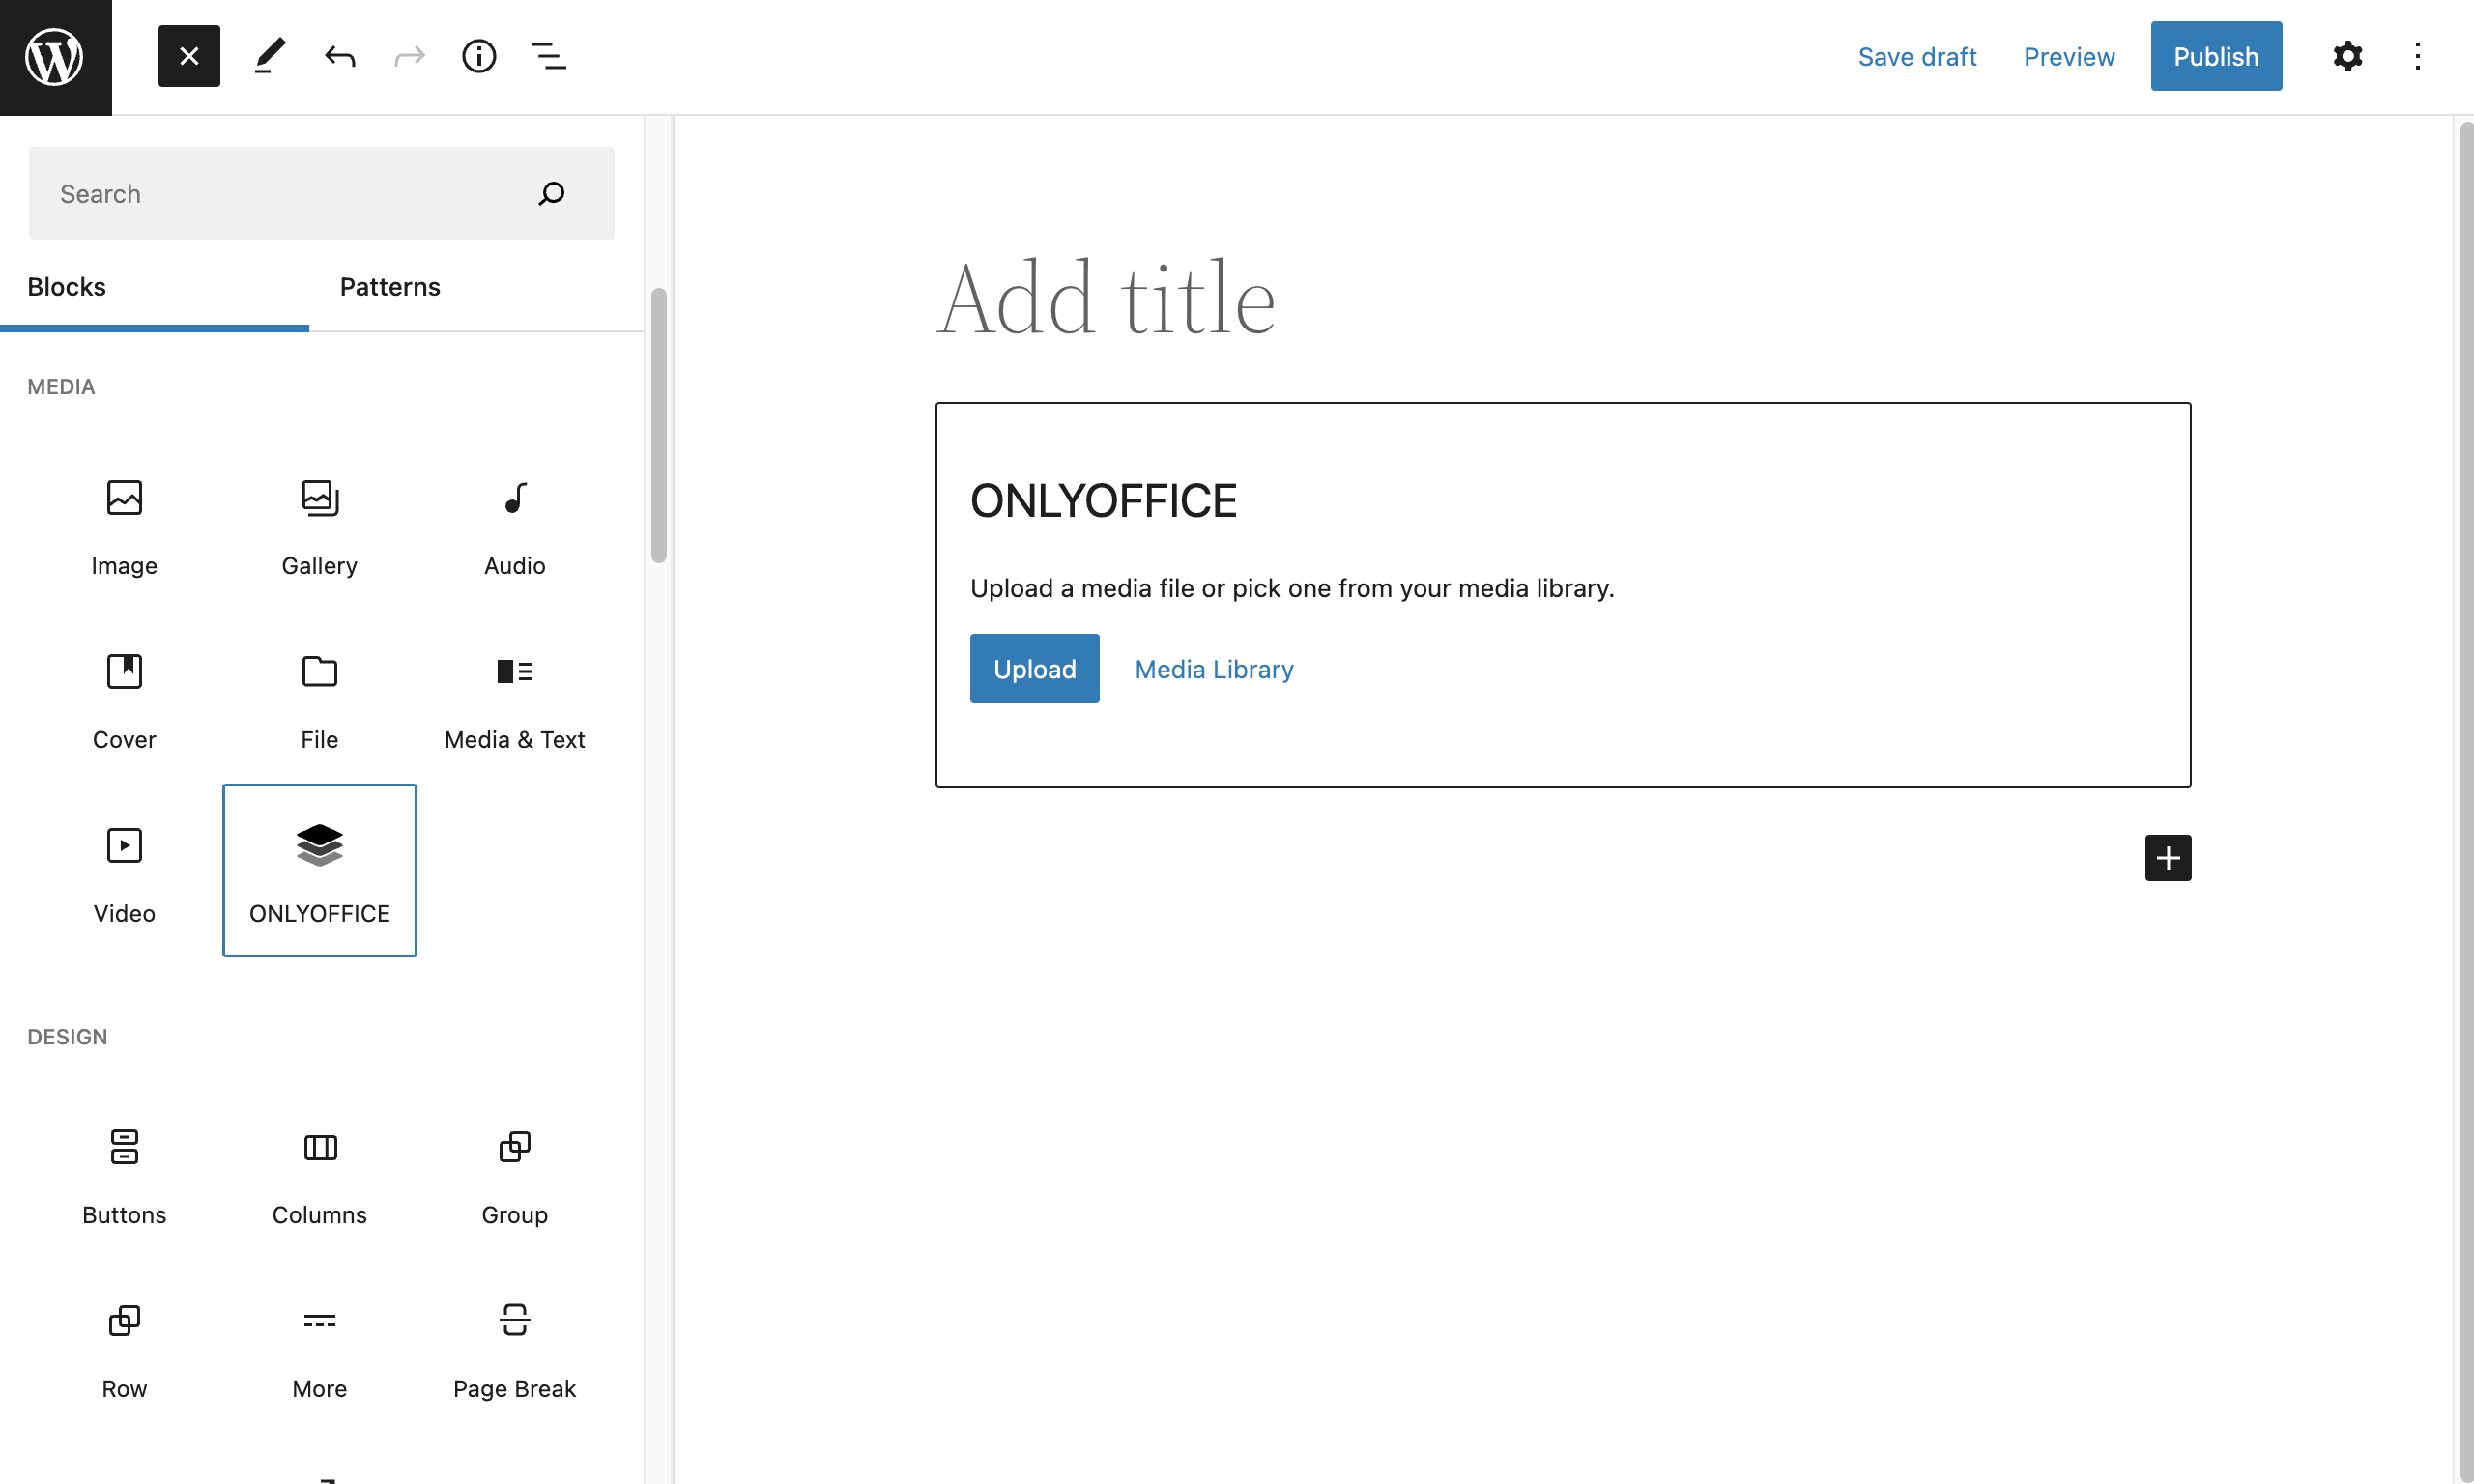 Uploading a new file or selecting one from the Media Library to the ONLYOFFICE block.